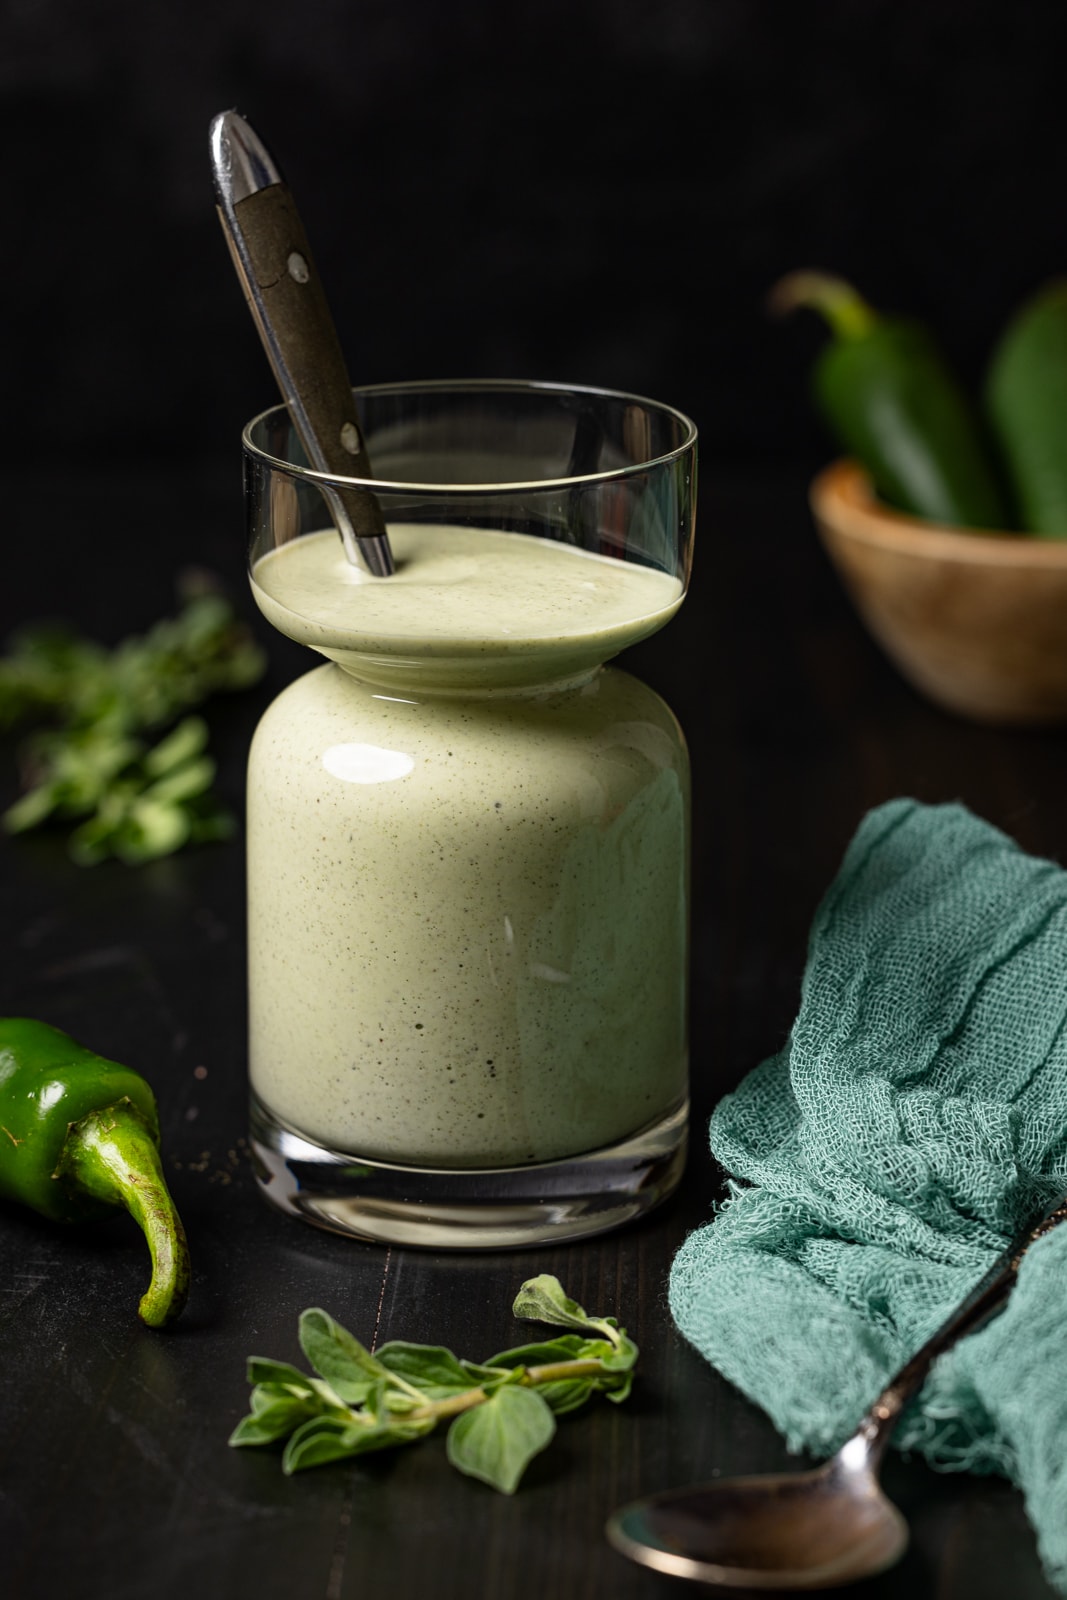 Sauce in a jar with a spoon and jalapenos.